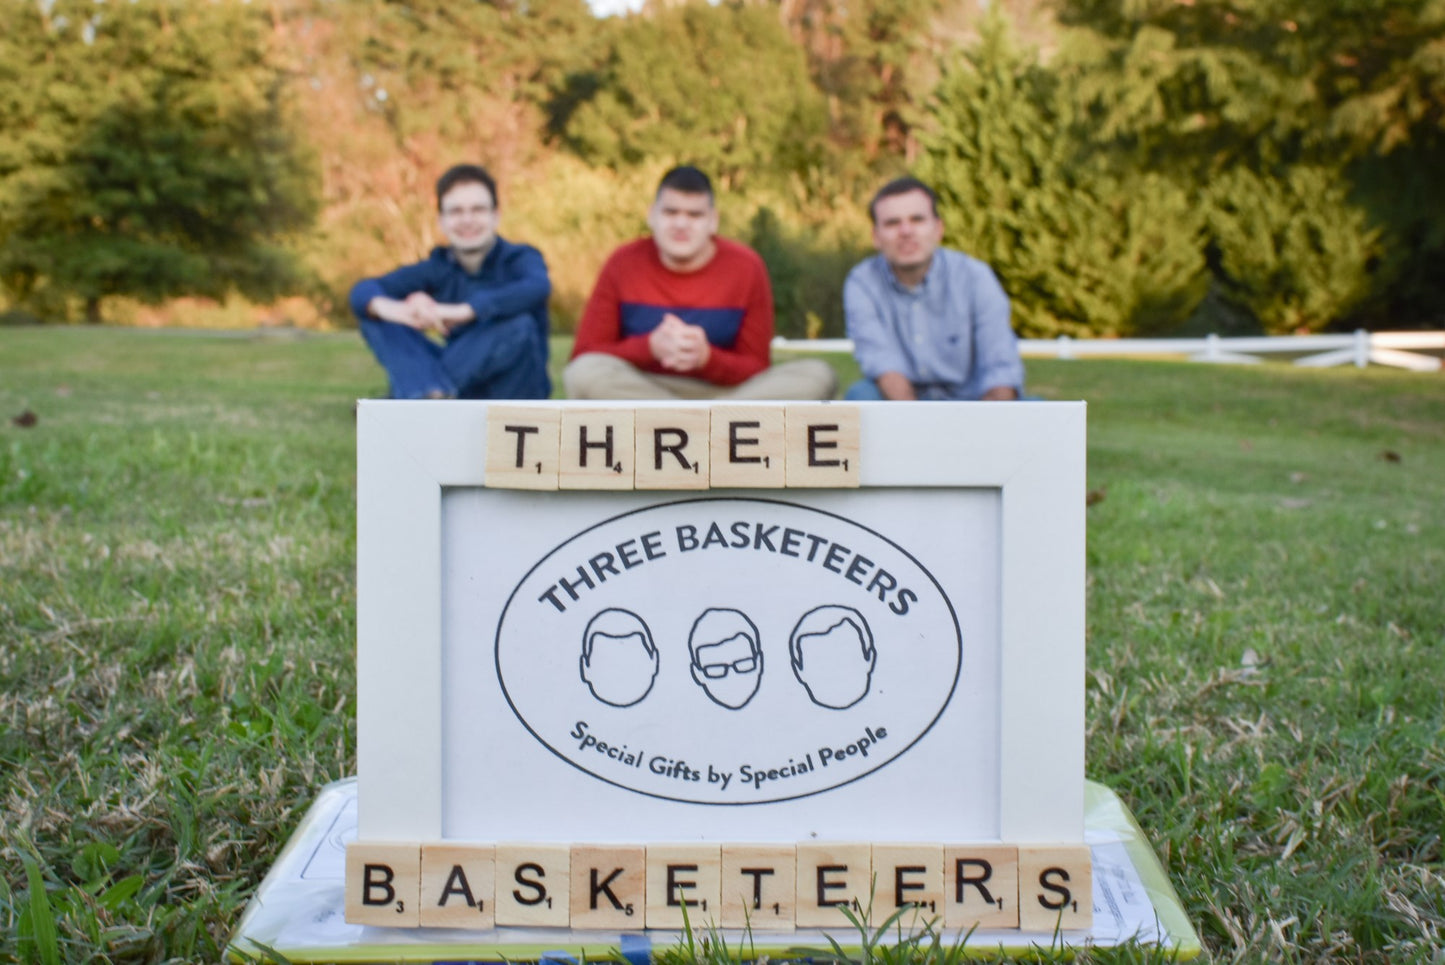 Close up of the Basketeers letter tile frame on the grass with three Basketeers sitting on the ground behind the frame